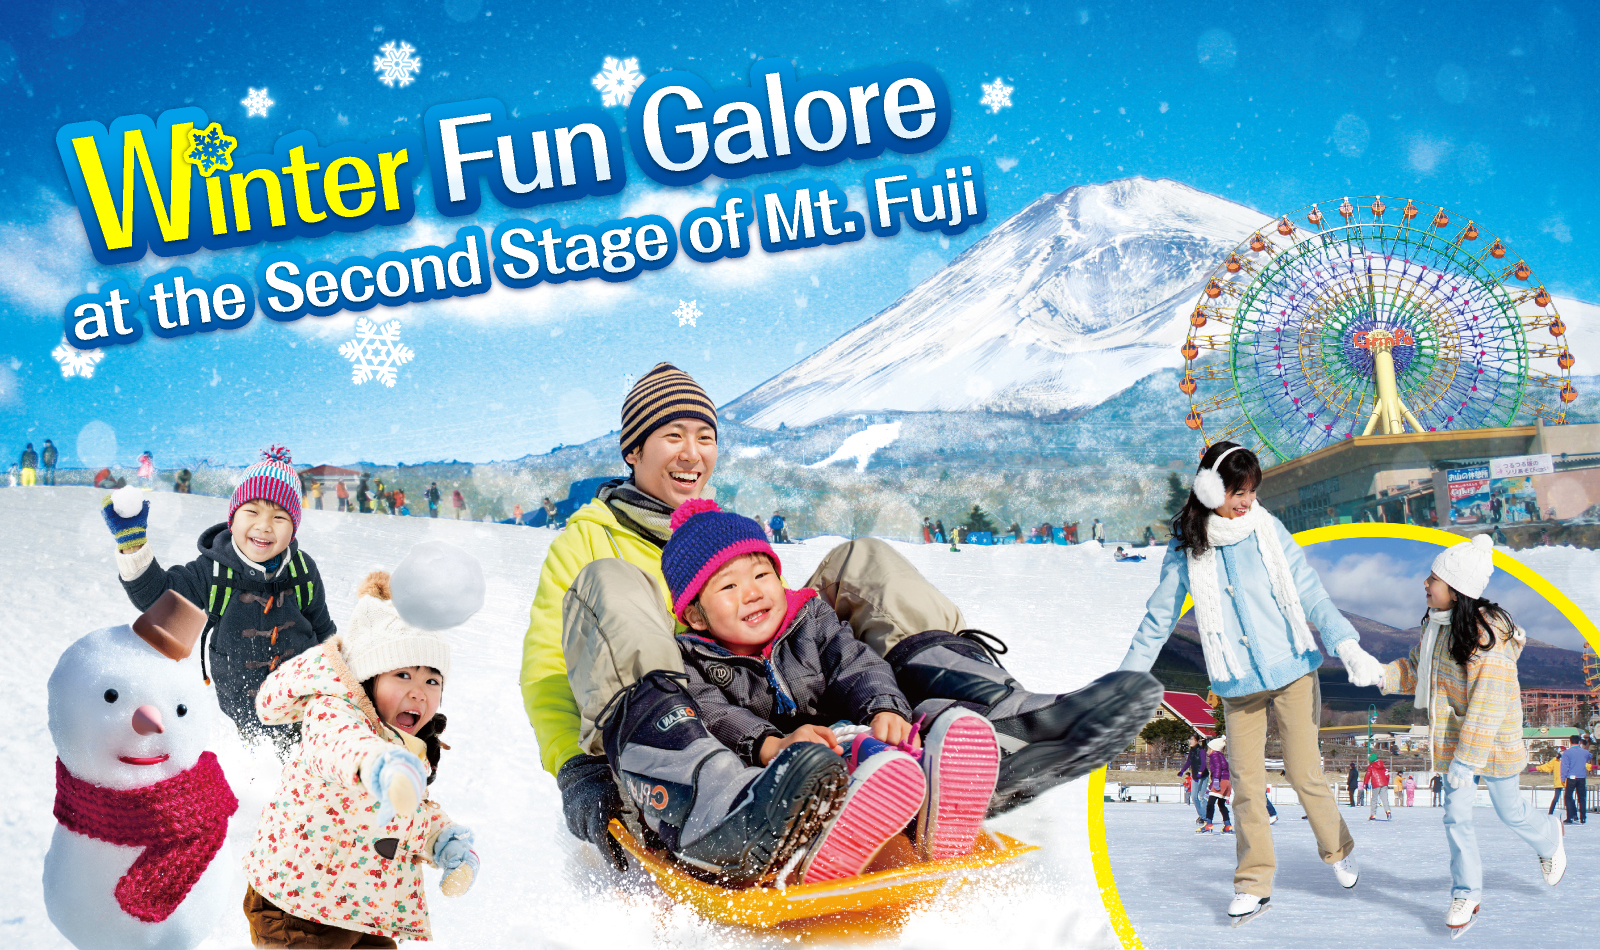 Winter Fun Galore at the Second Stage ofMt.Fuji